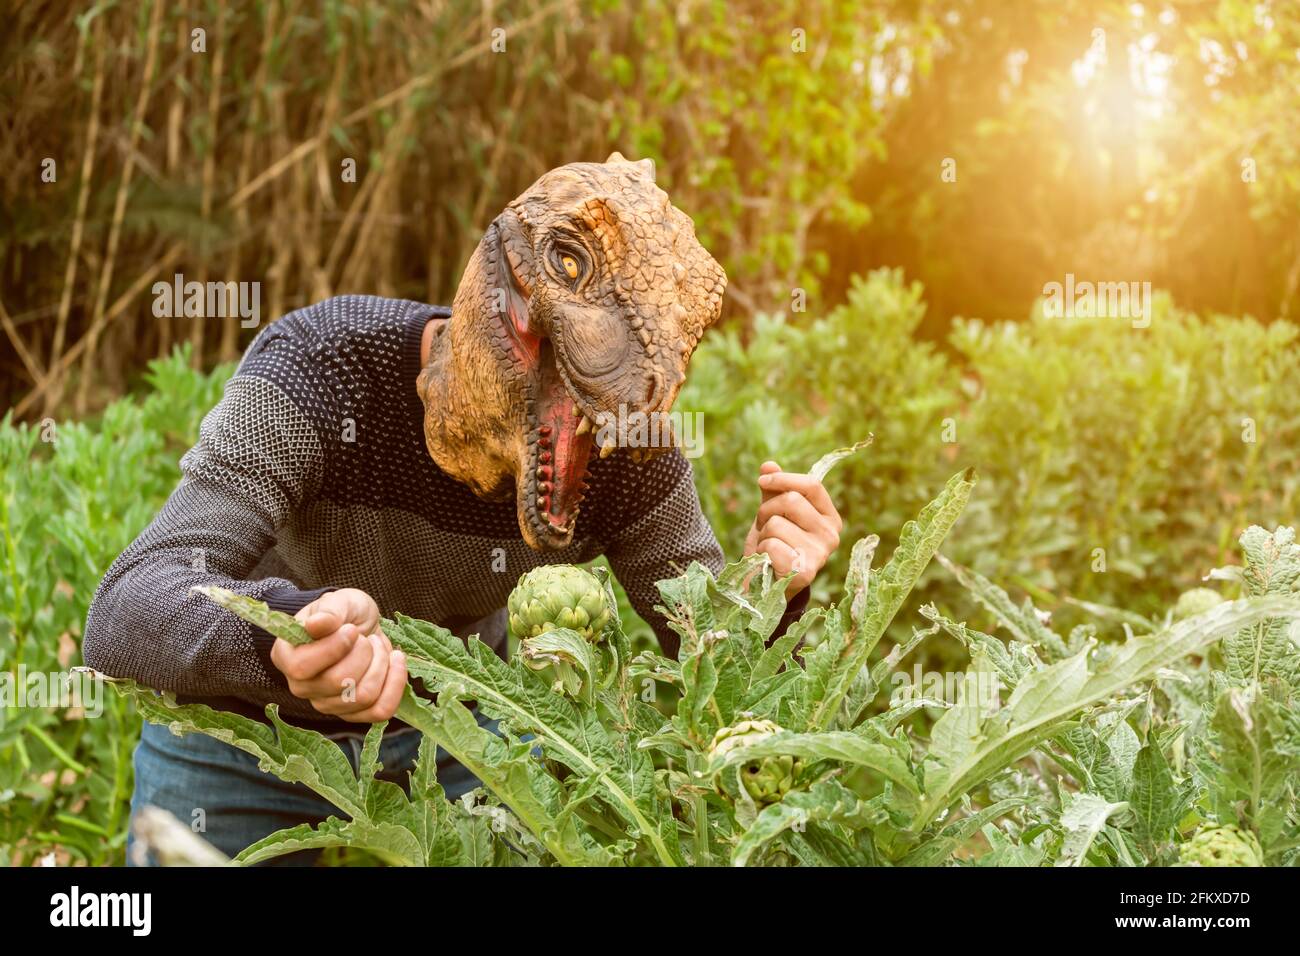 Man with dinosaur animal head mask eating artichokes in vegetables garden at sunset. Stock Photo